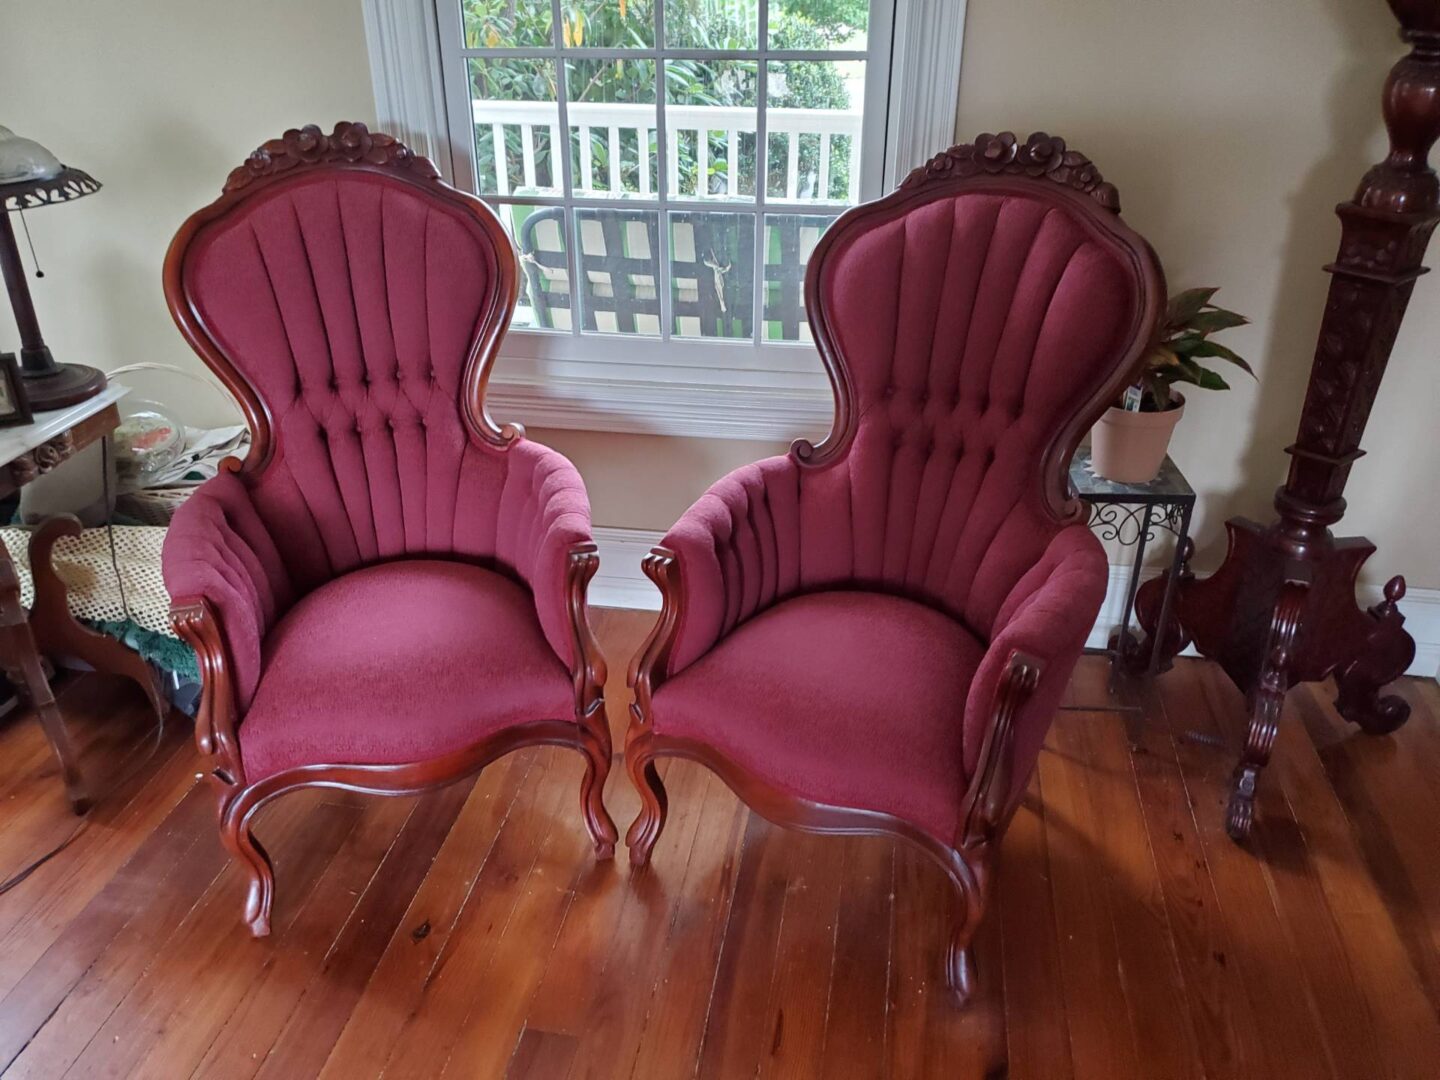 East Meadow Upholsterers Corp